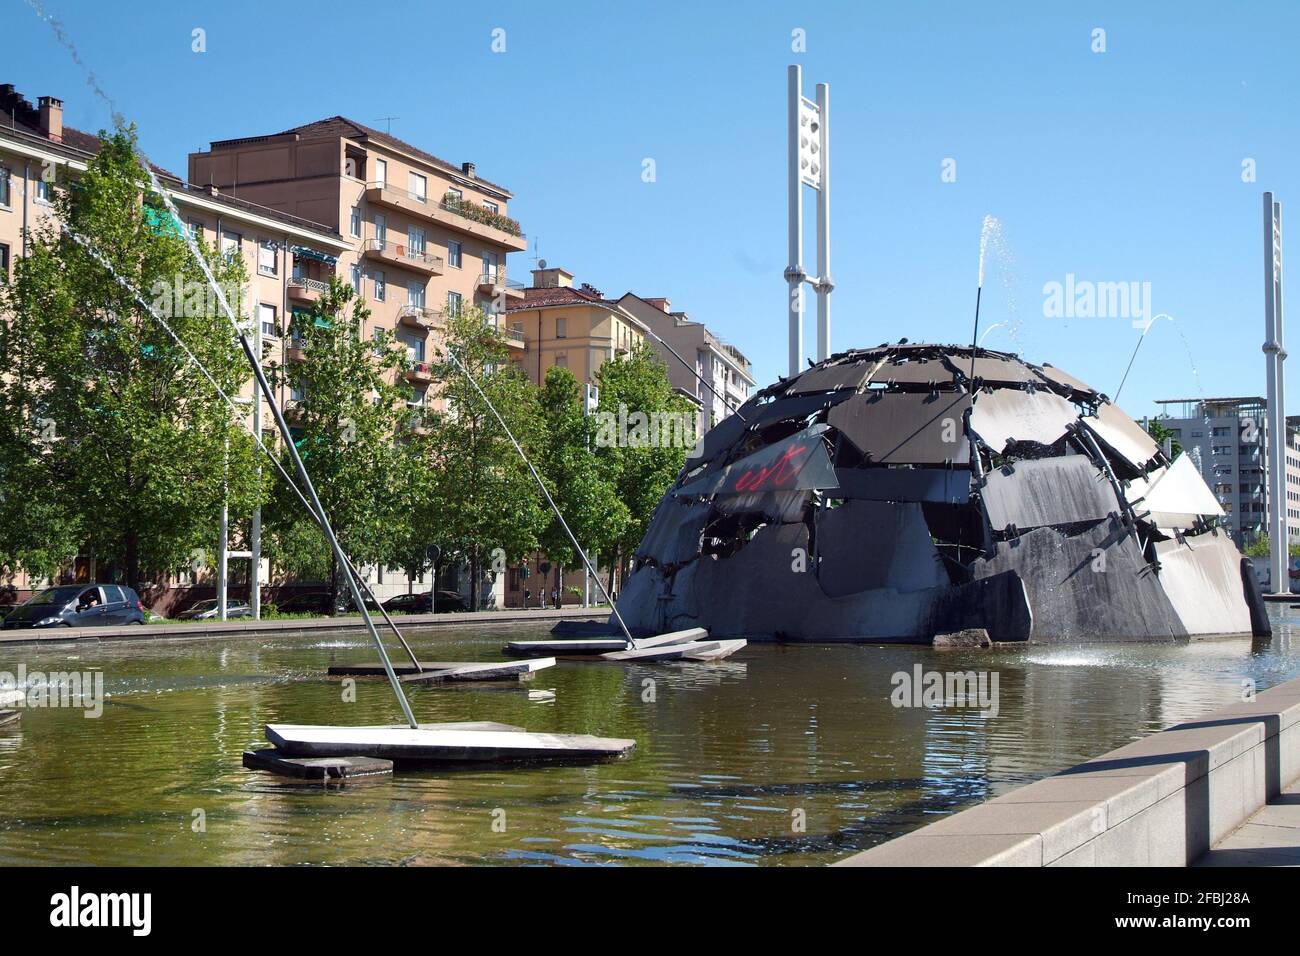 Turin, Piedmont/Italy-05/04/2014- The Fountain Igloo sculpture of the artist Mario Merz in San Paolo district. Stock Photo